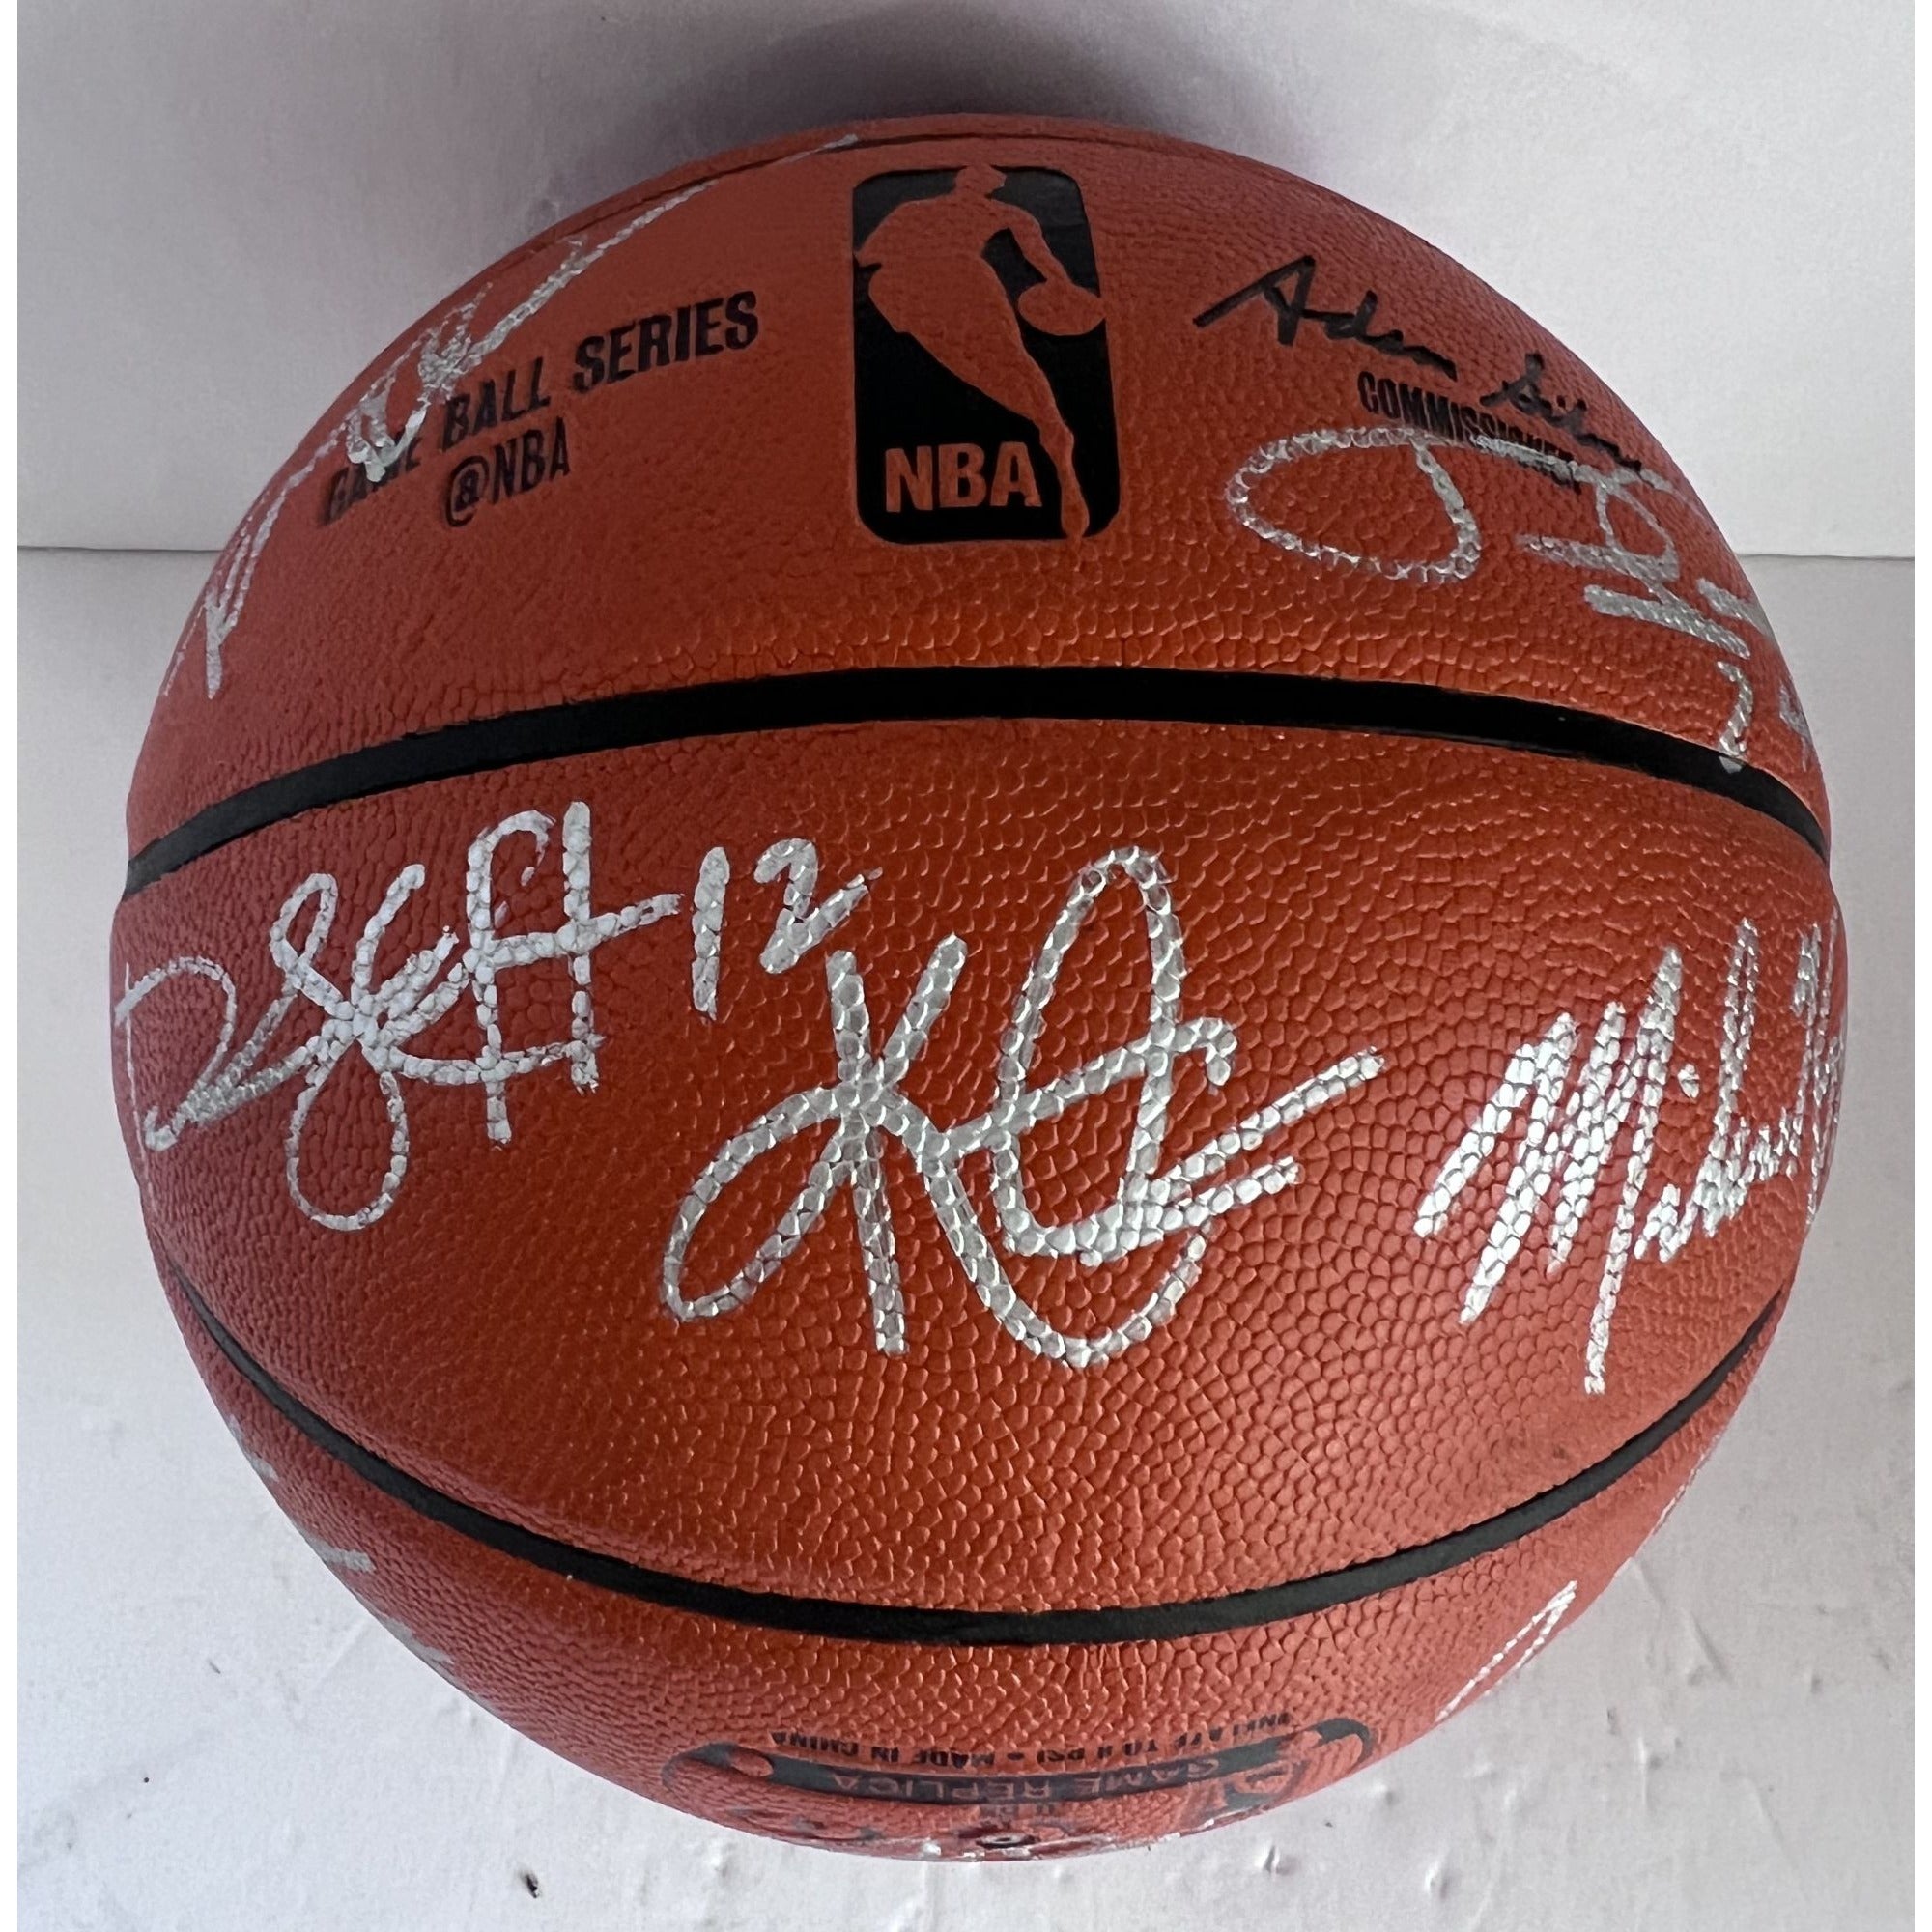 LeBron James Paul George Kevin Durant Carmelo Anthony 2020 Team USA Spalding full size Adams Stern basketball